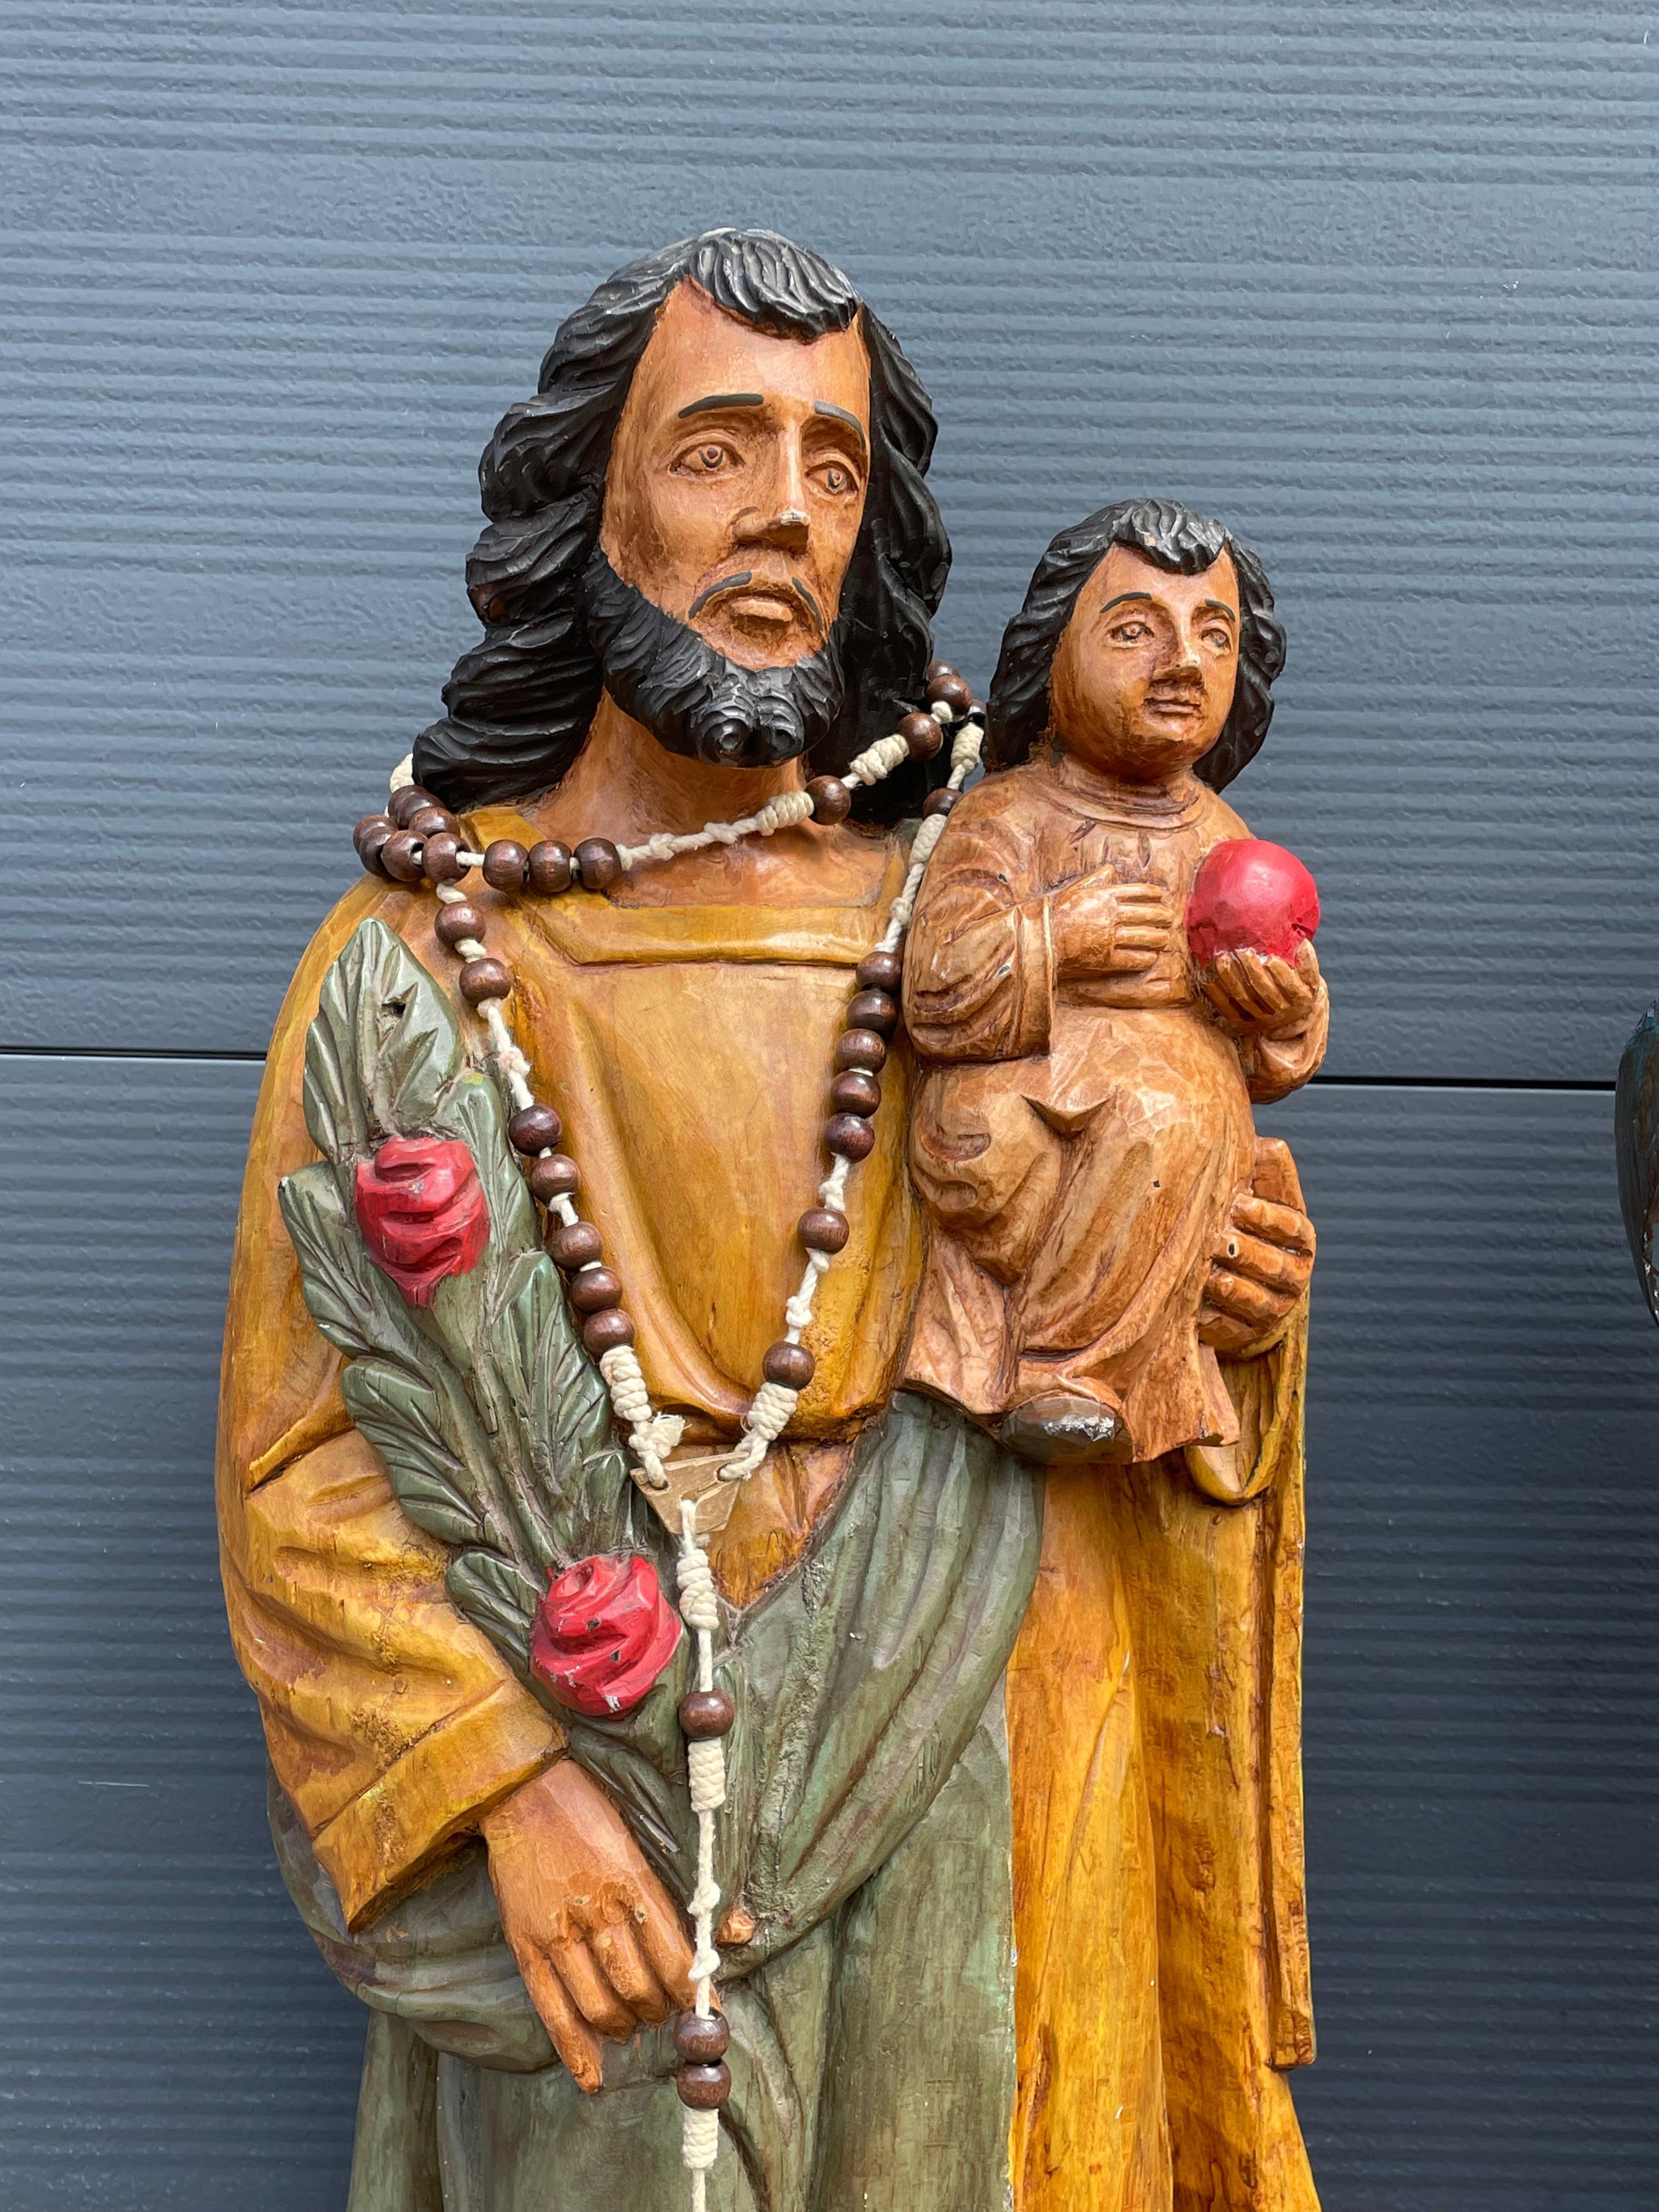 Large Pair of Hand Carved Wooden Mary & Joseph Sculptures, Both with Child Jesus im Angebot 2